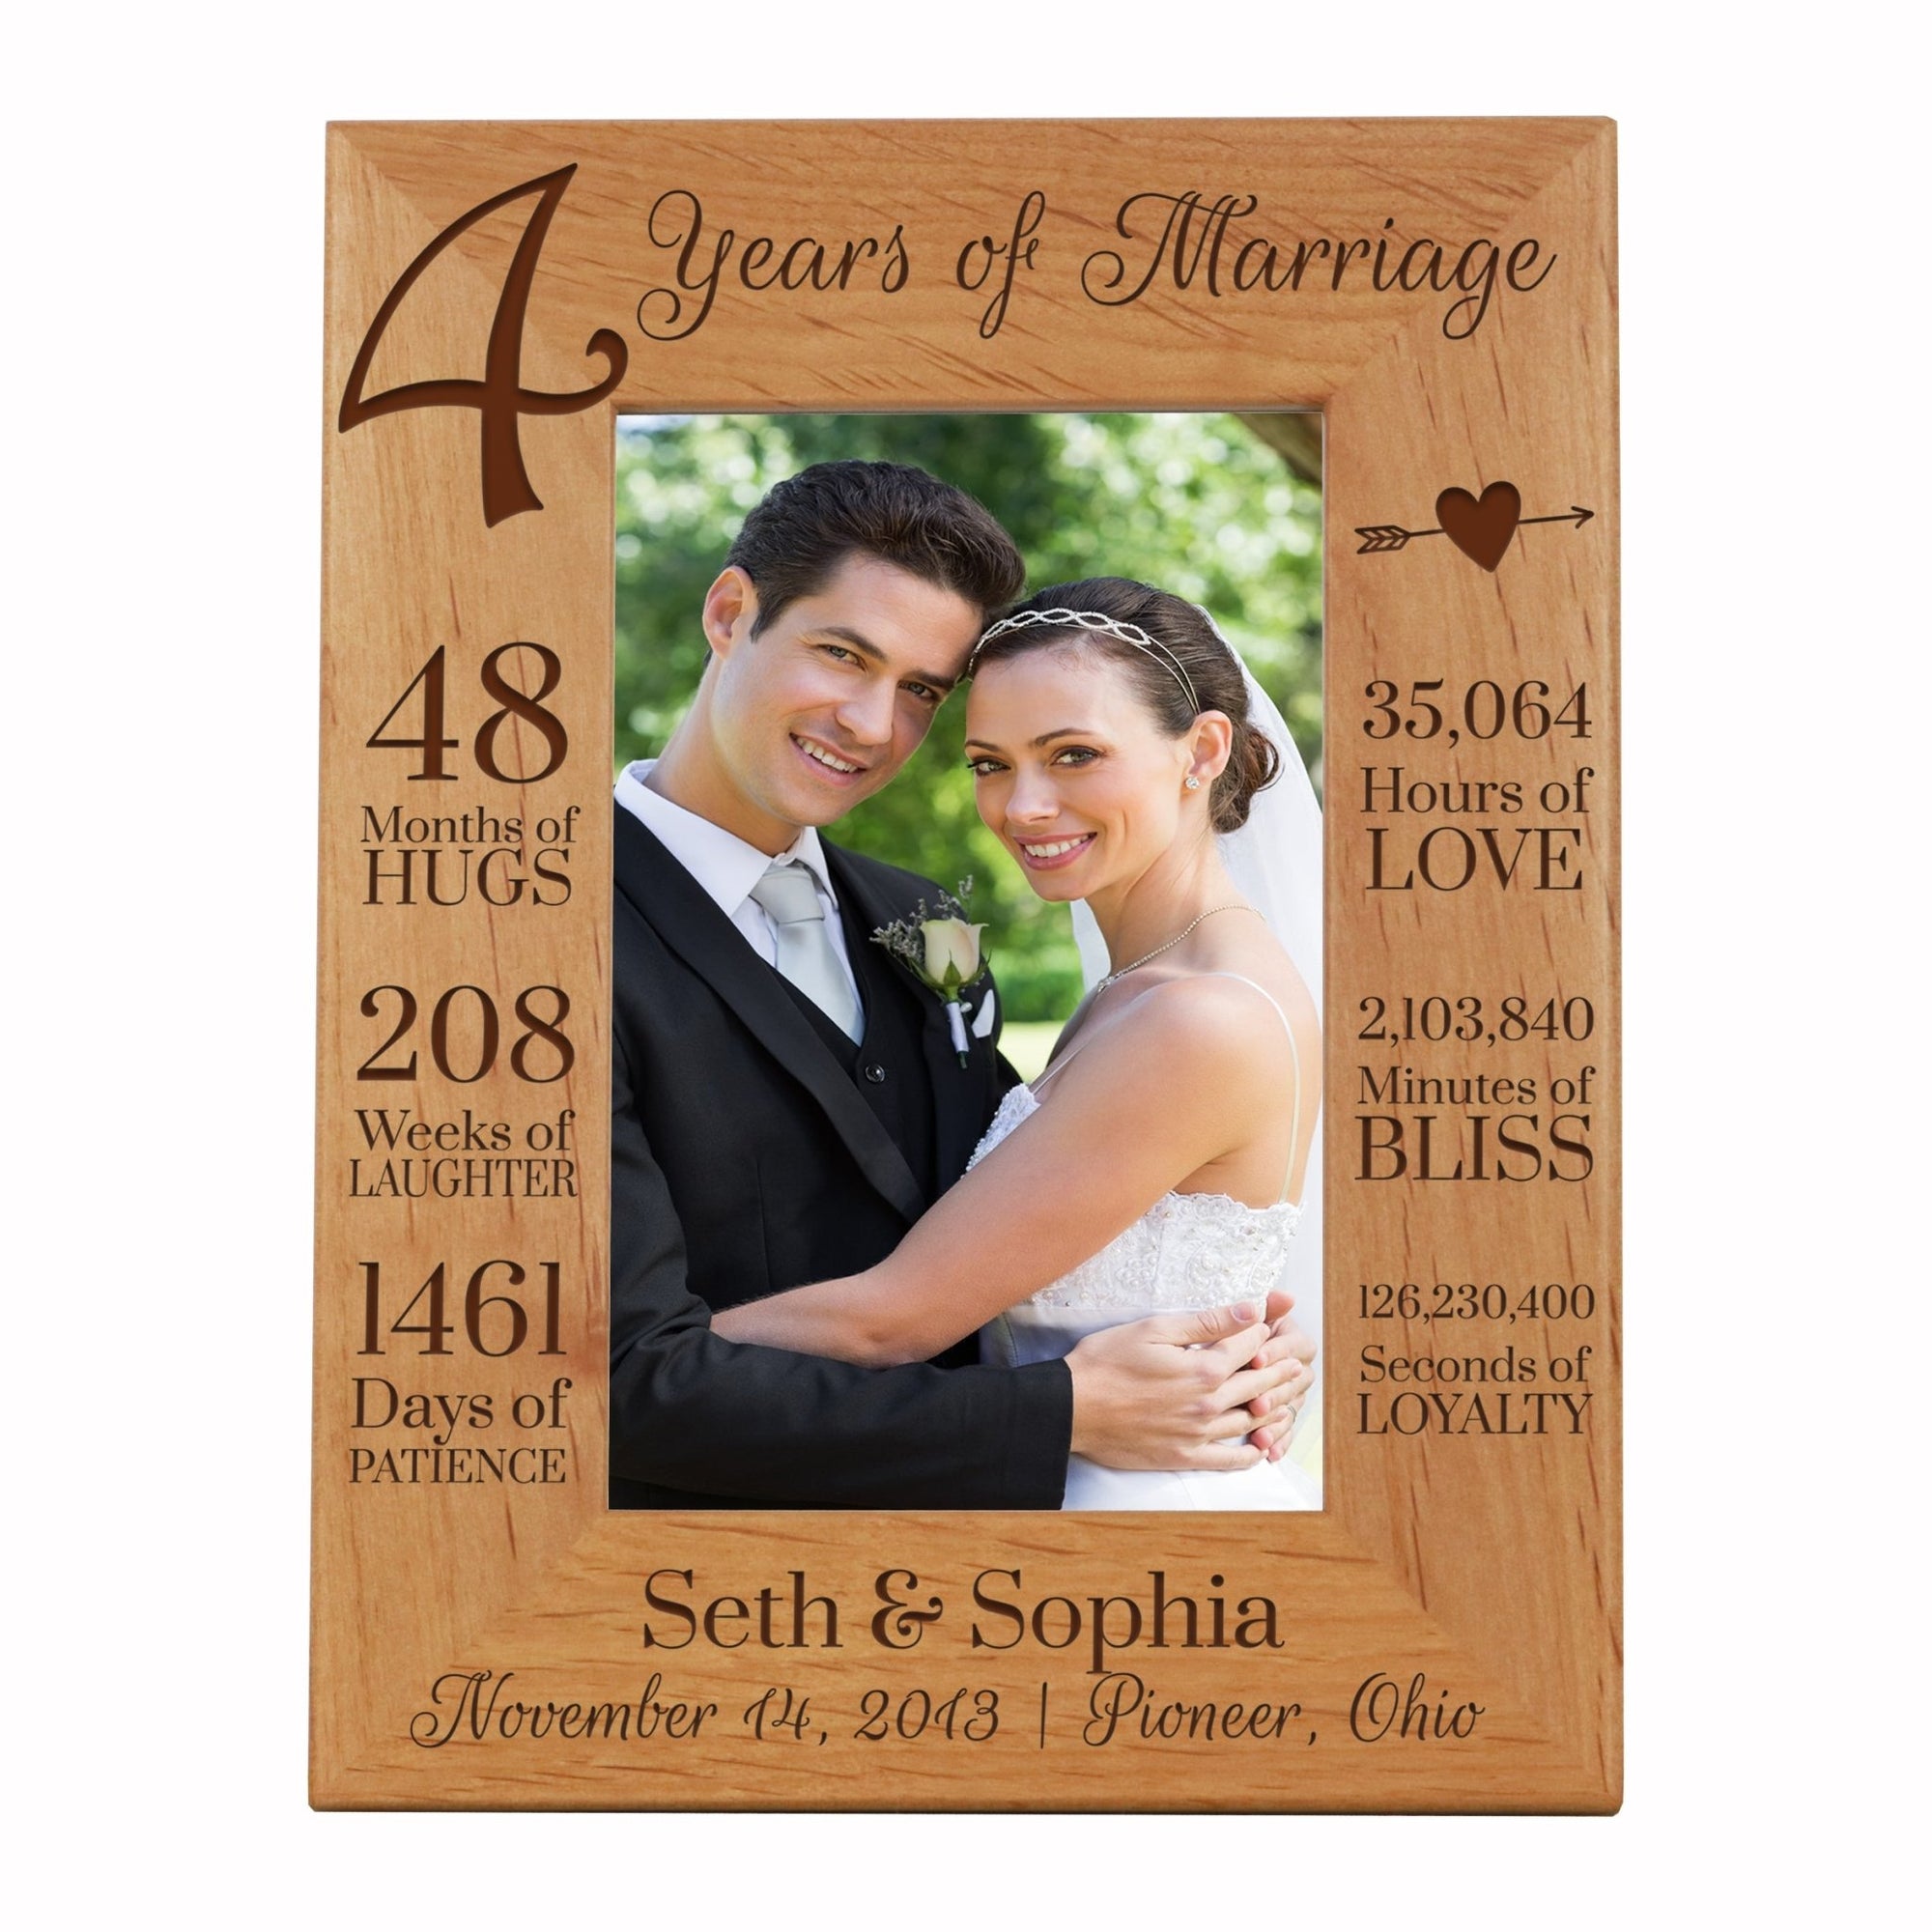 Lifesong Milestones Personalized Engraved 4th Wedding Anniversary Photo Frame Wall Decor Gift for Couples